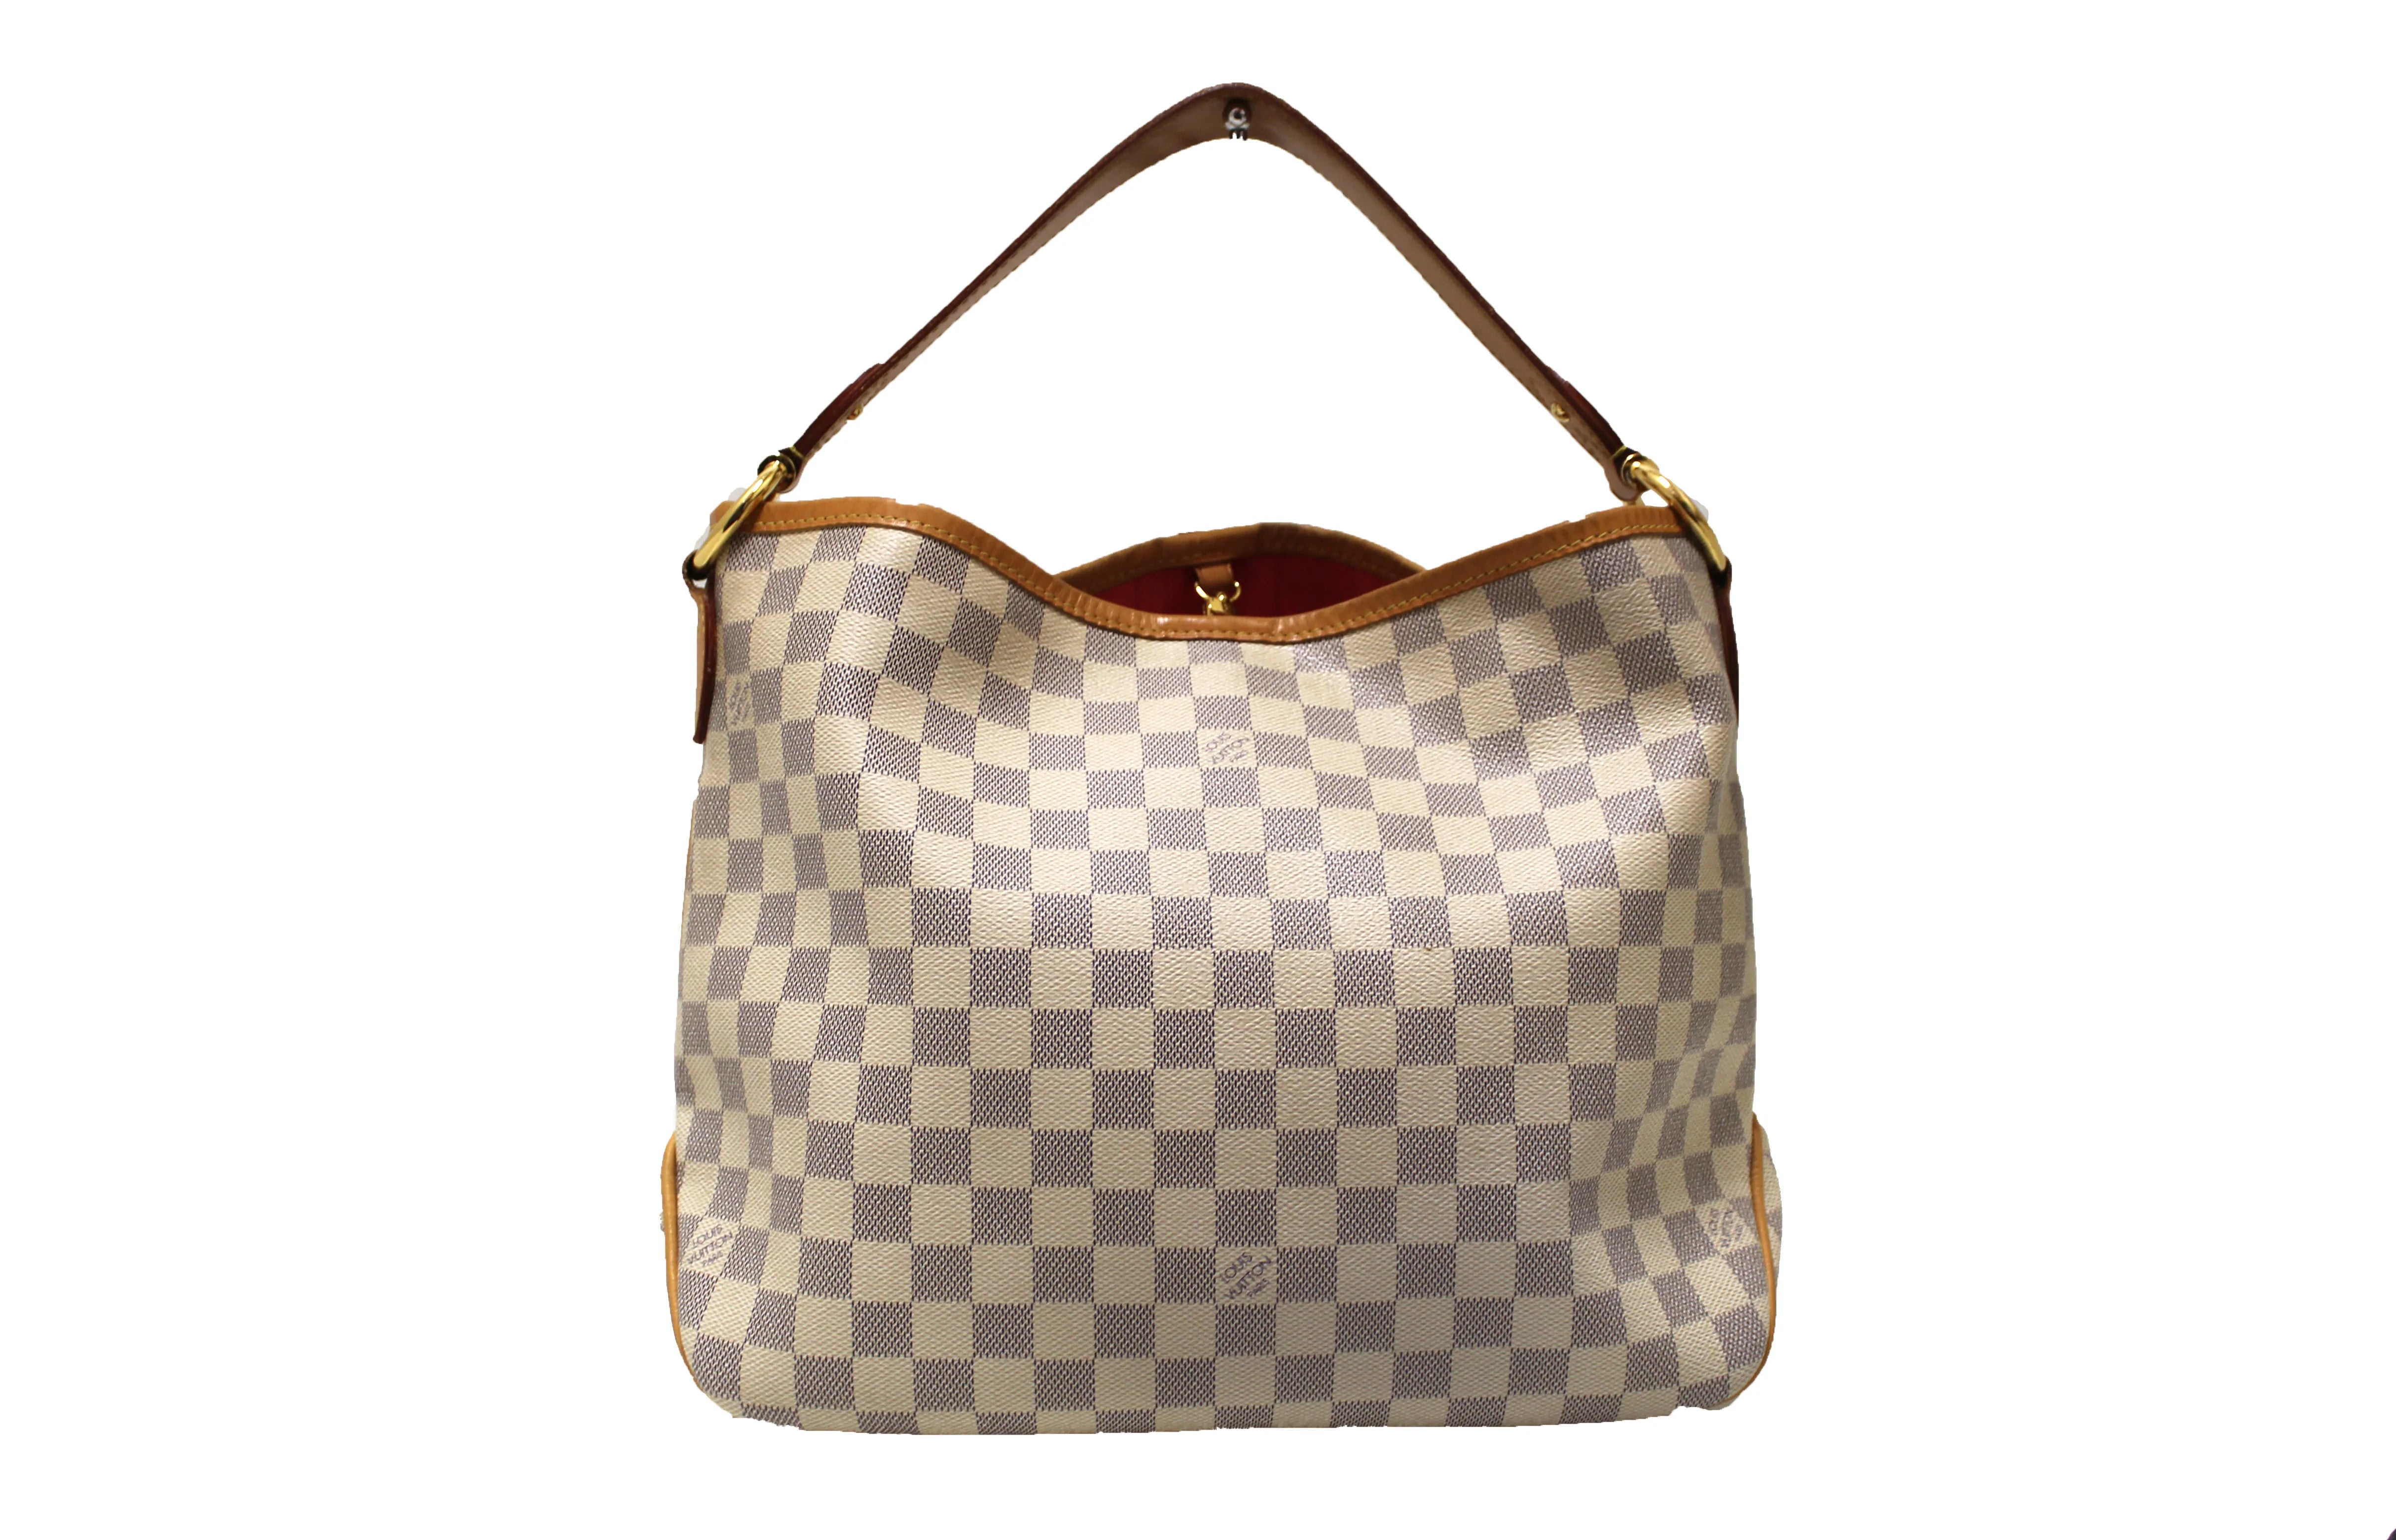 Louis+Vuitton+Delightful+Tote+GM+Brown+Leather+Zipper+Pocket for